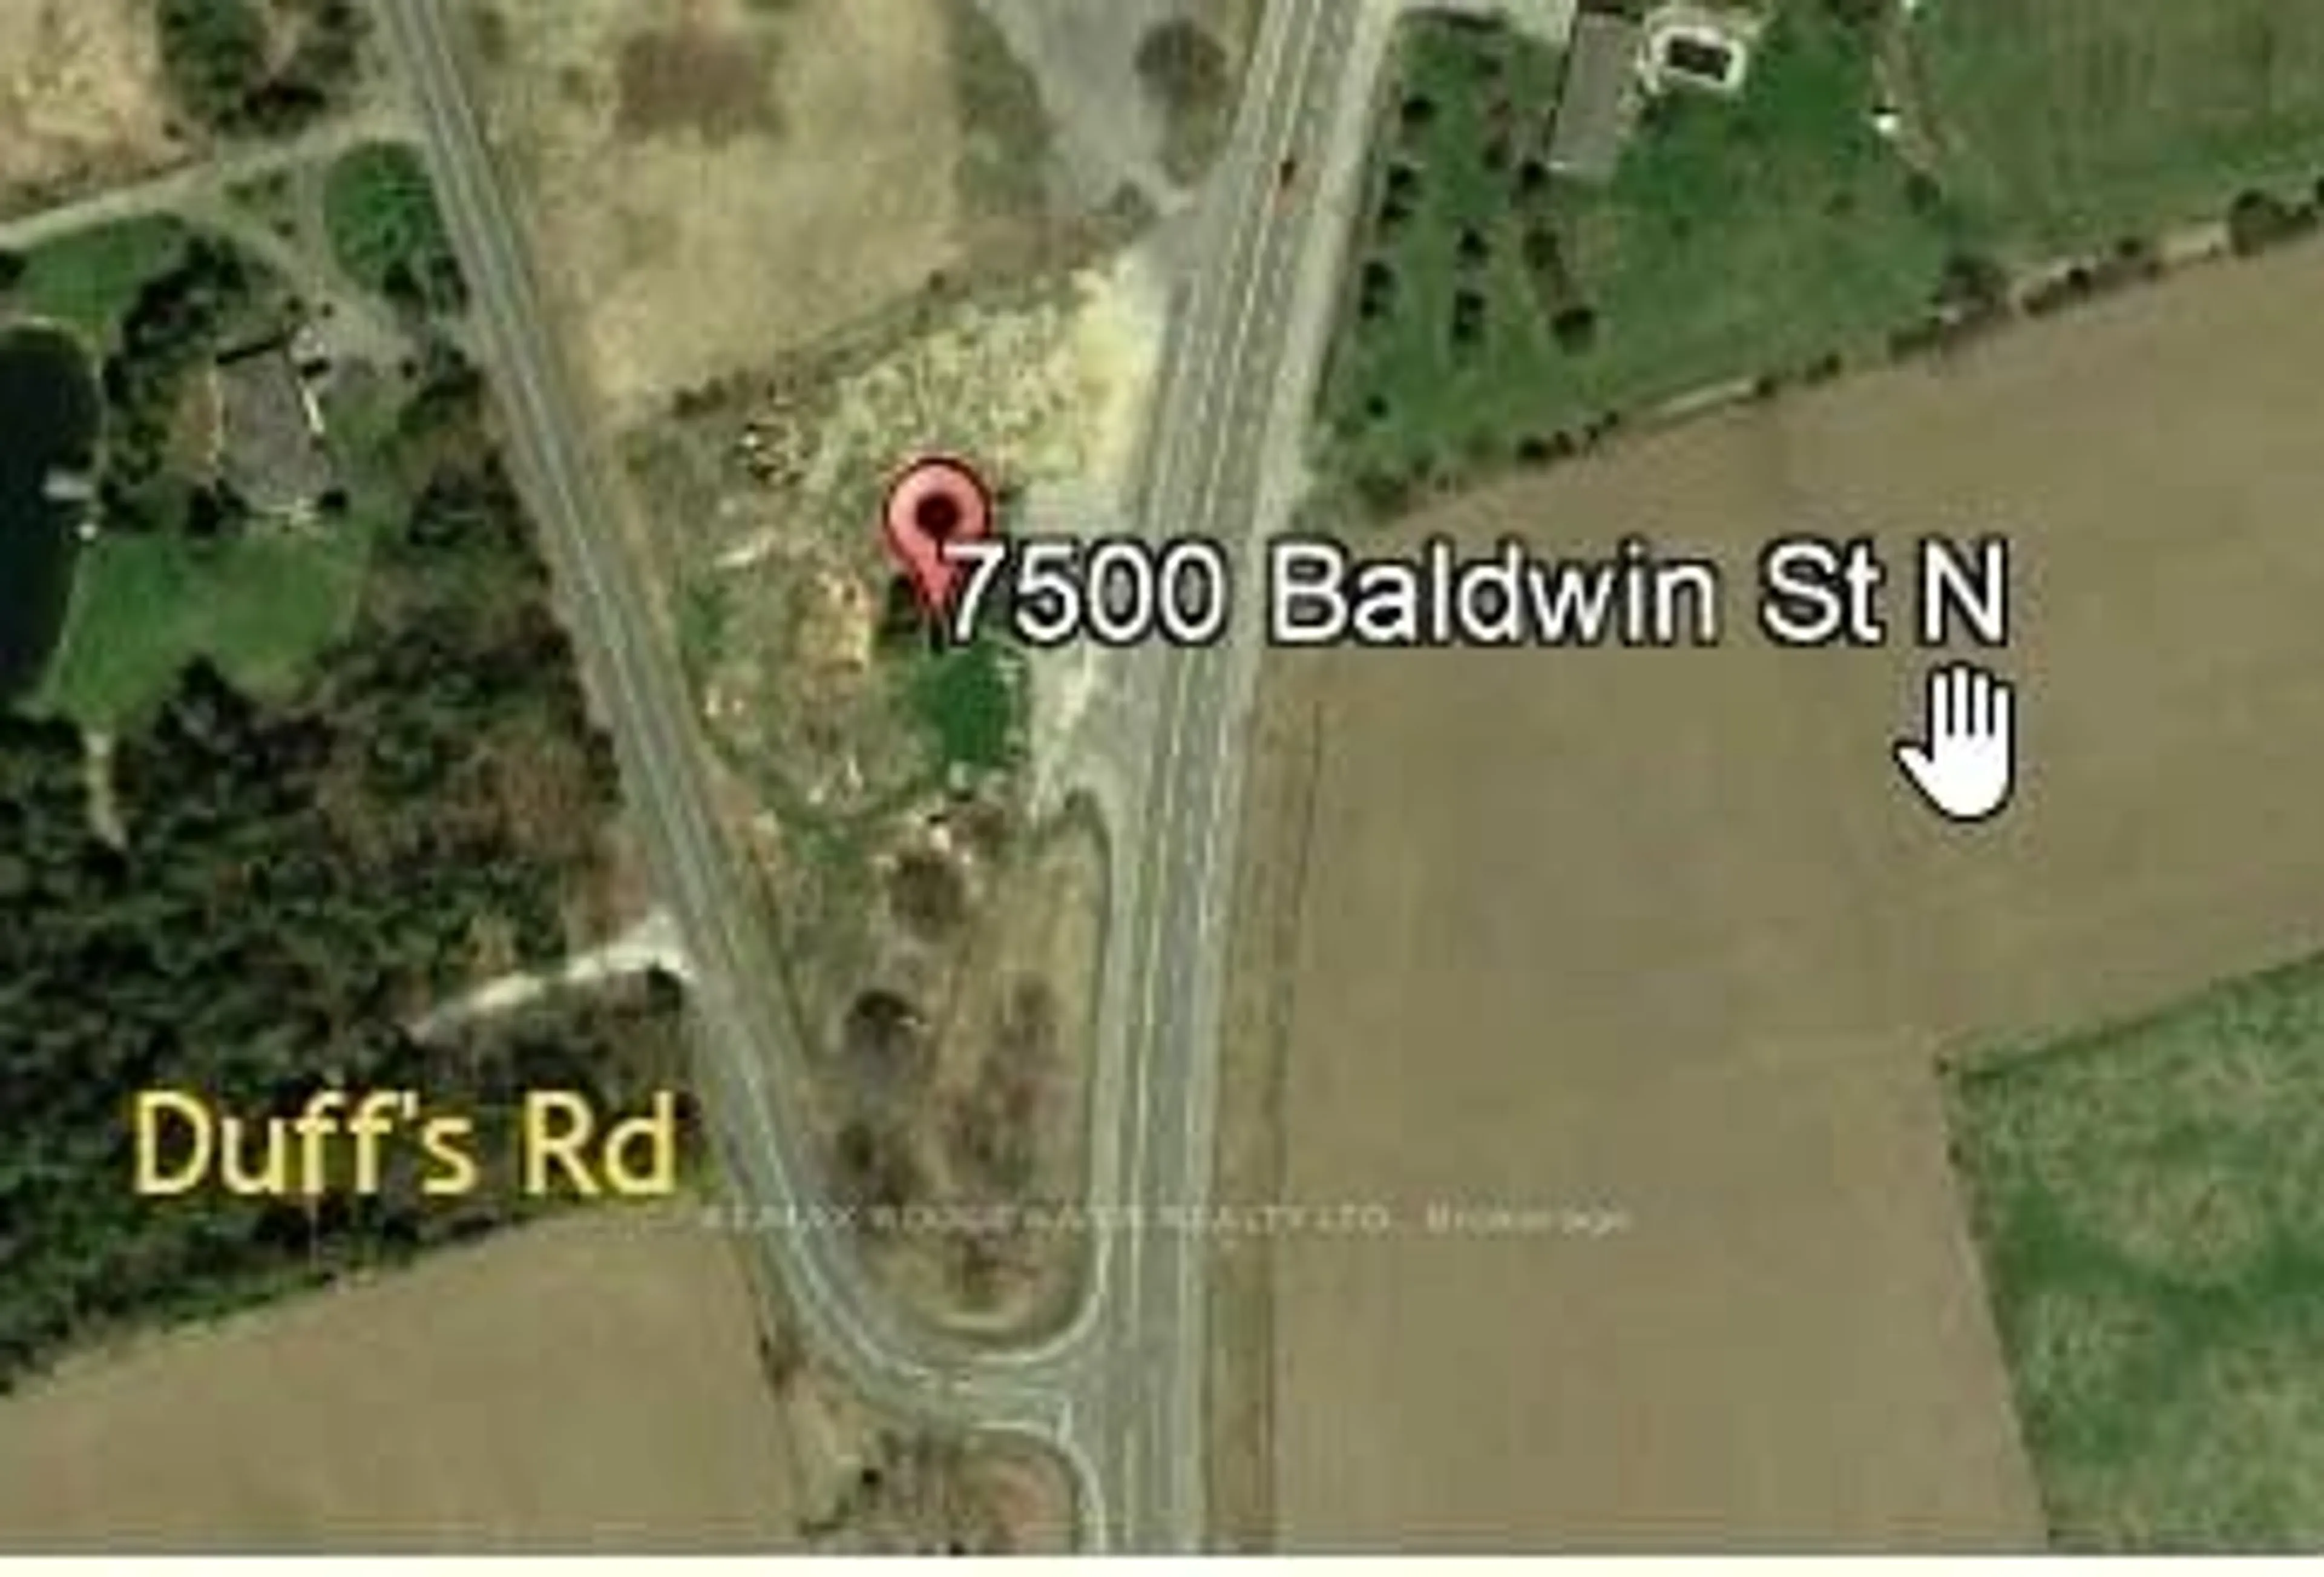 Picture of a map for 7500 Baldwin St, Whitby Ontario L1M 1Y4